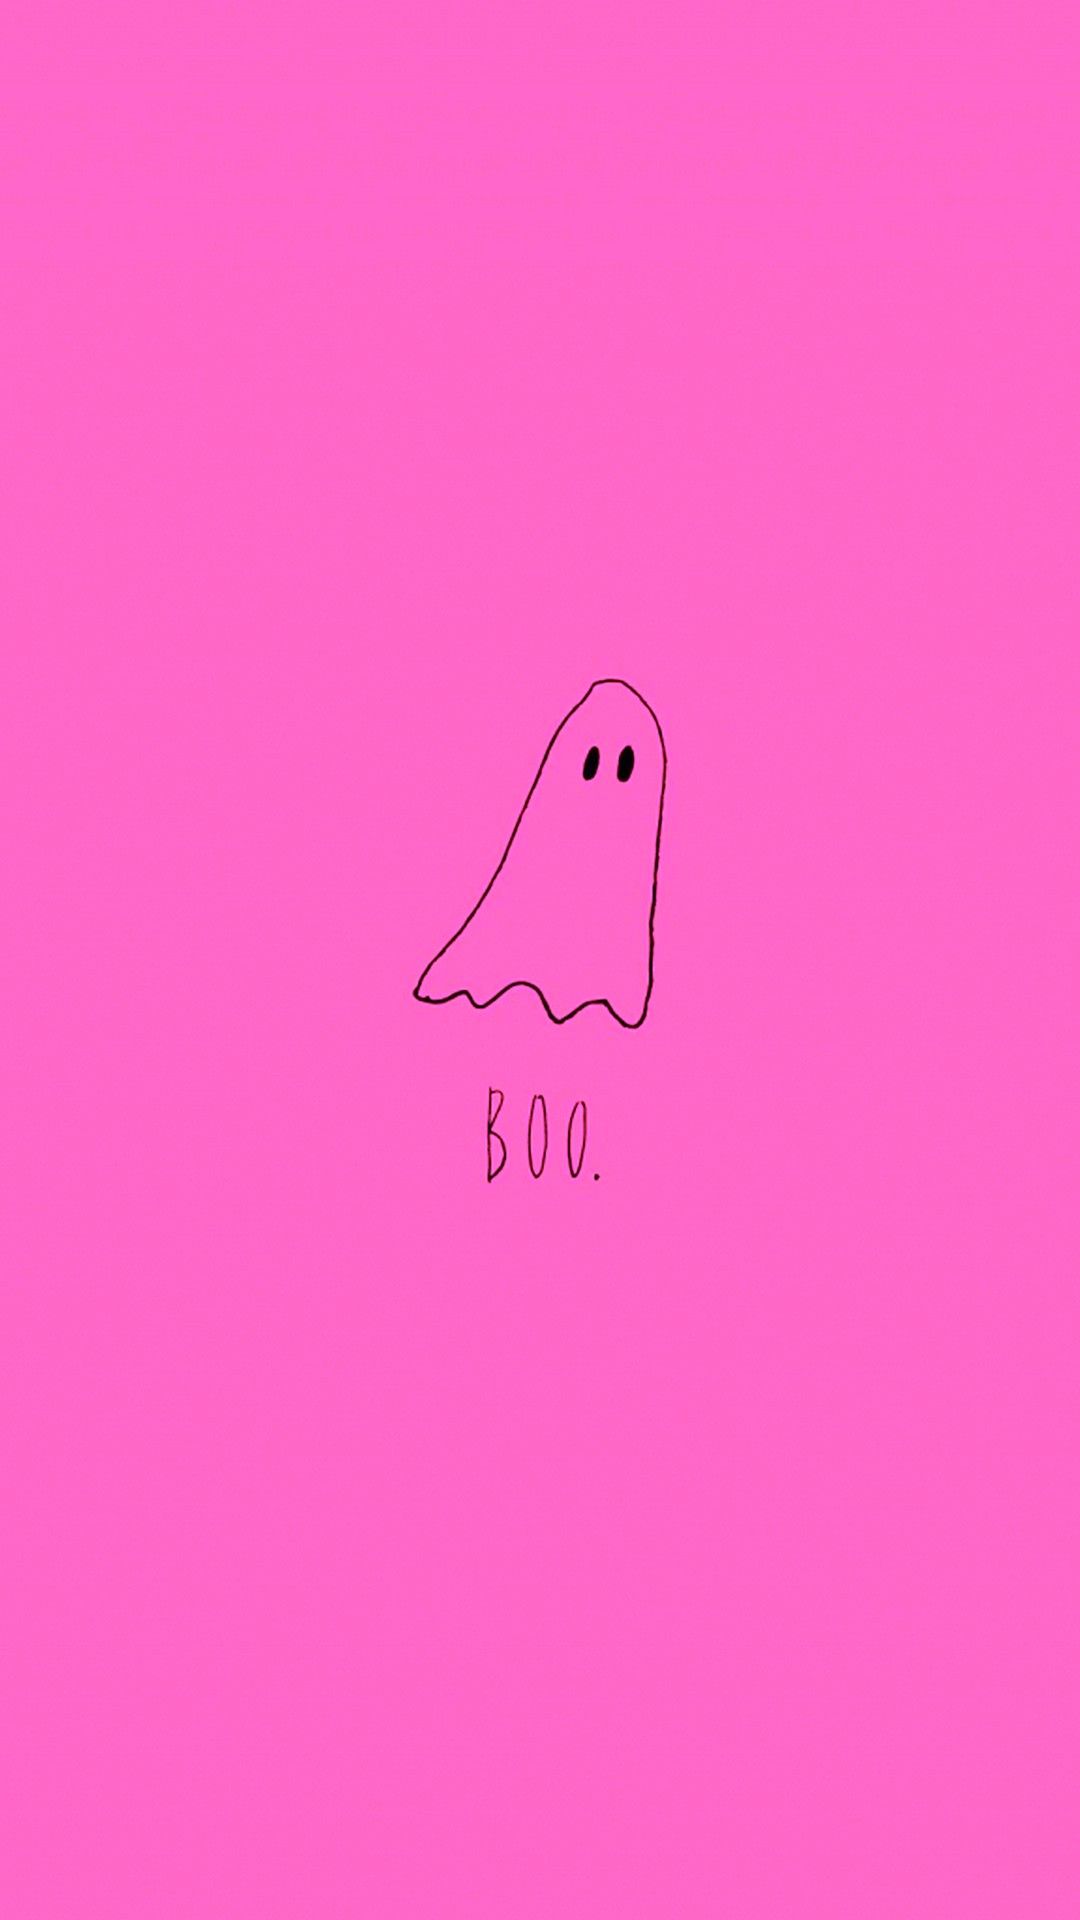 A pink background with a small ghost that says 